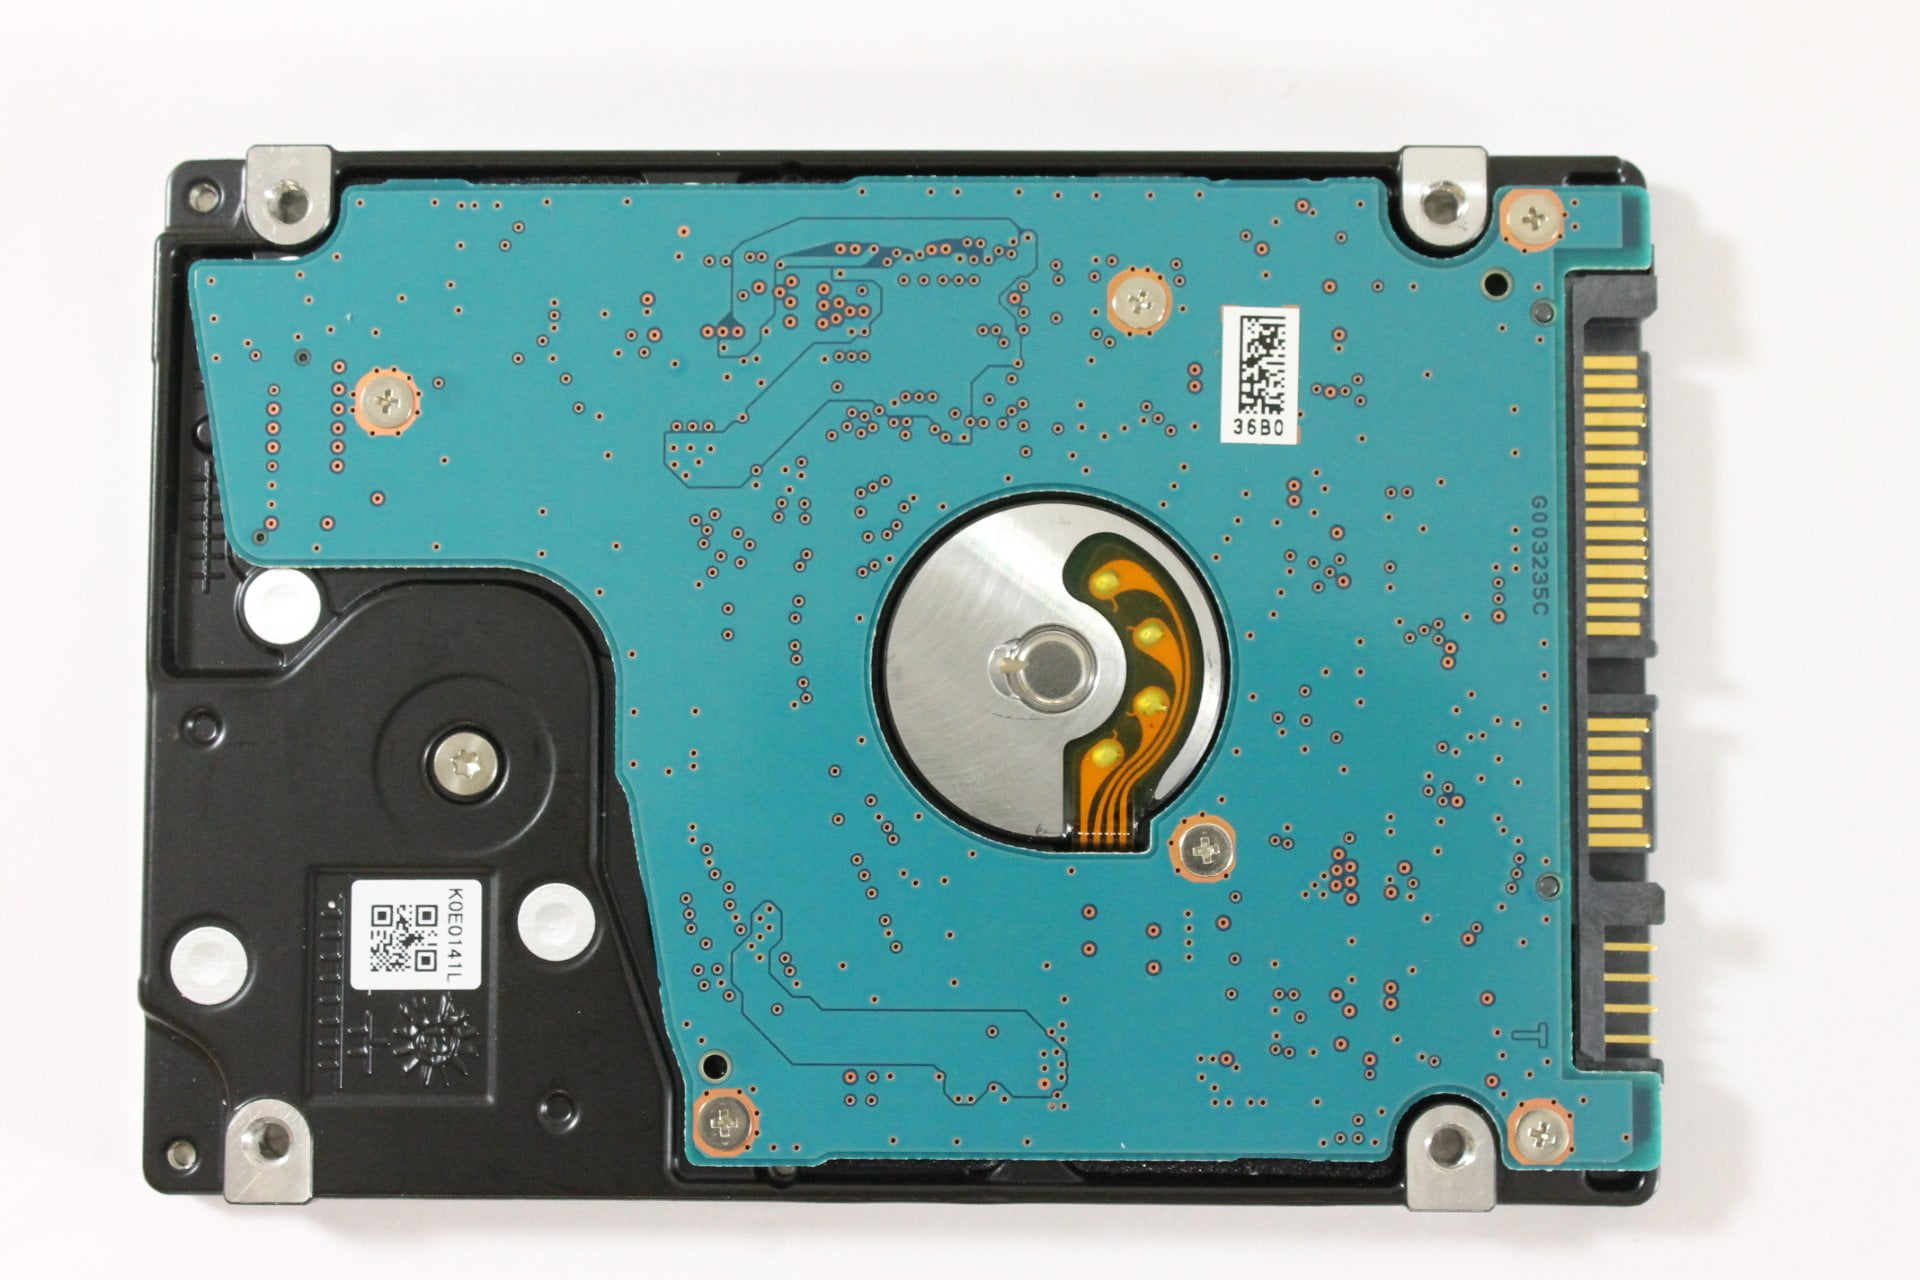 replacing dell laptop hard drive